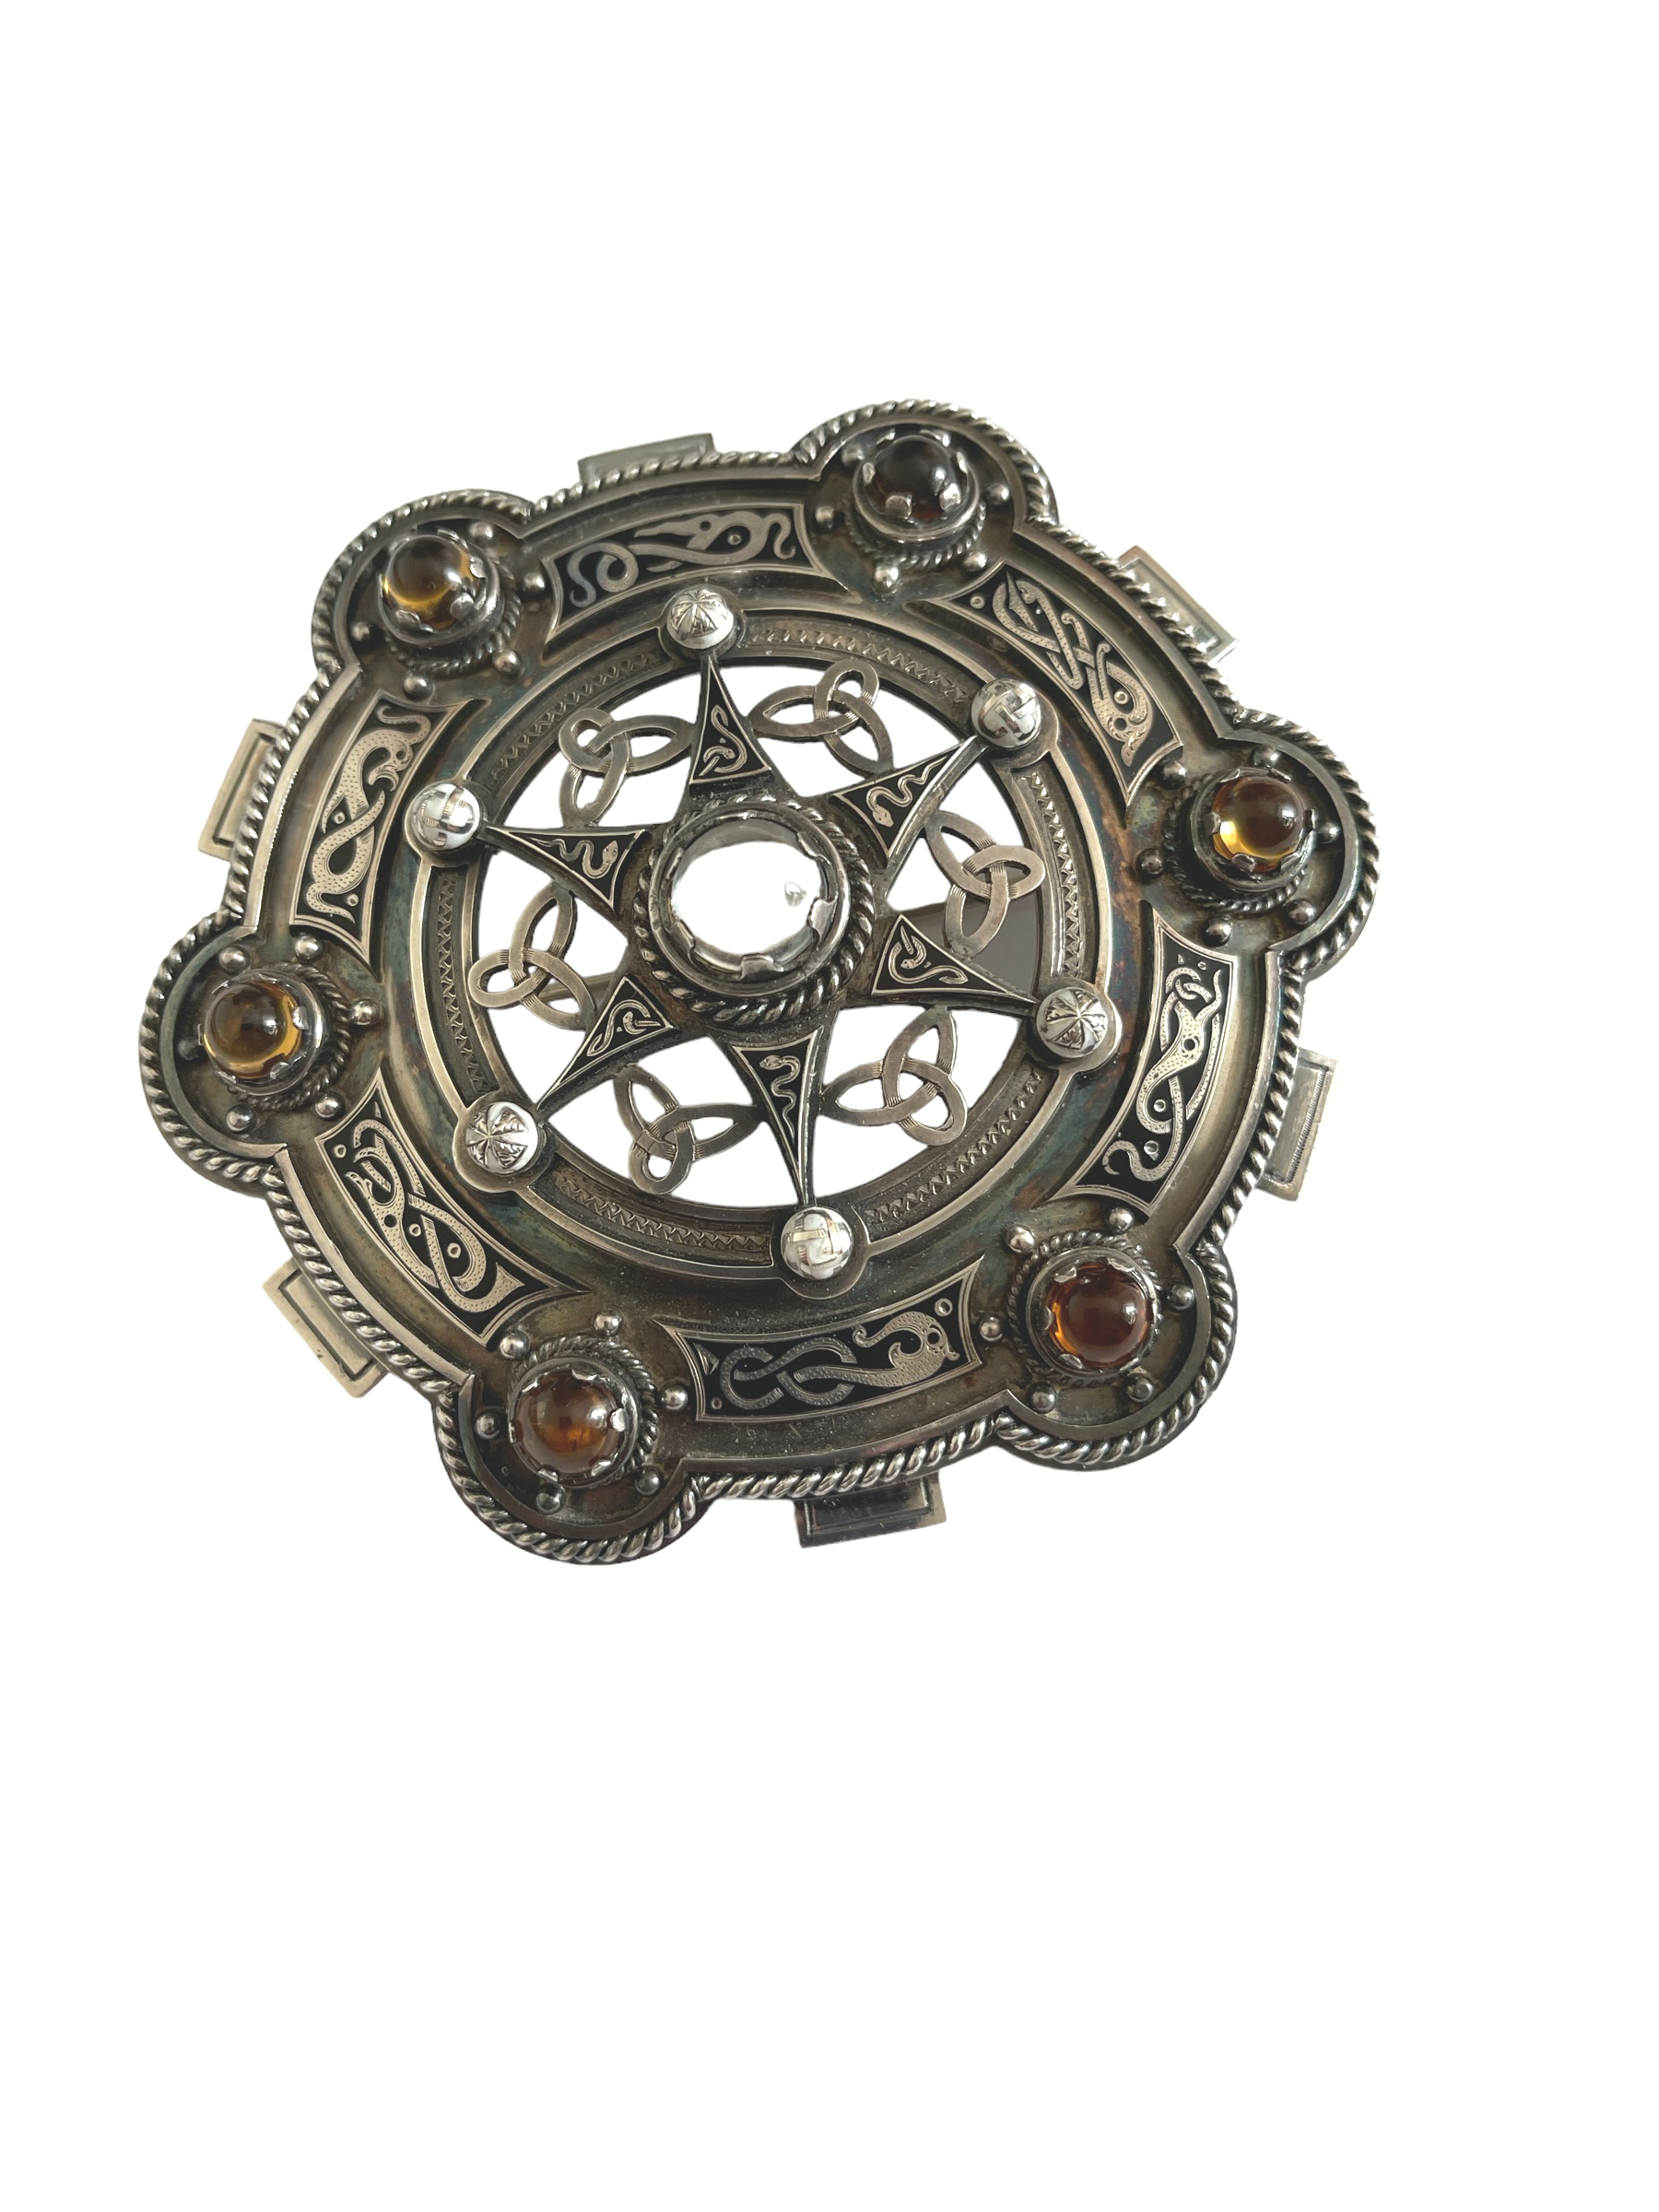 Large Important Antique Scottish Silver and Gemstone Brooch - 107mm dia - Cunningham Clan.